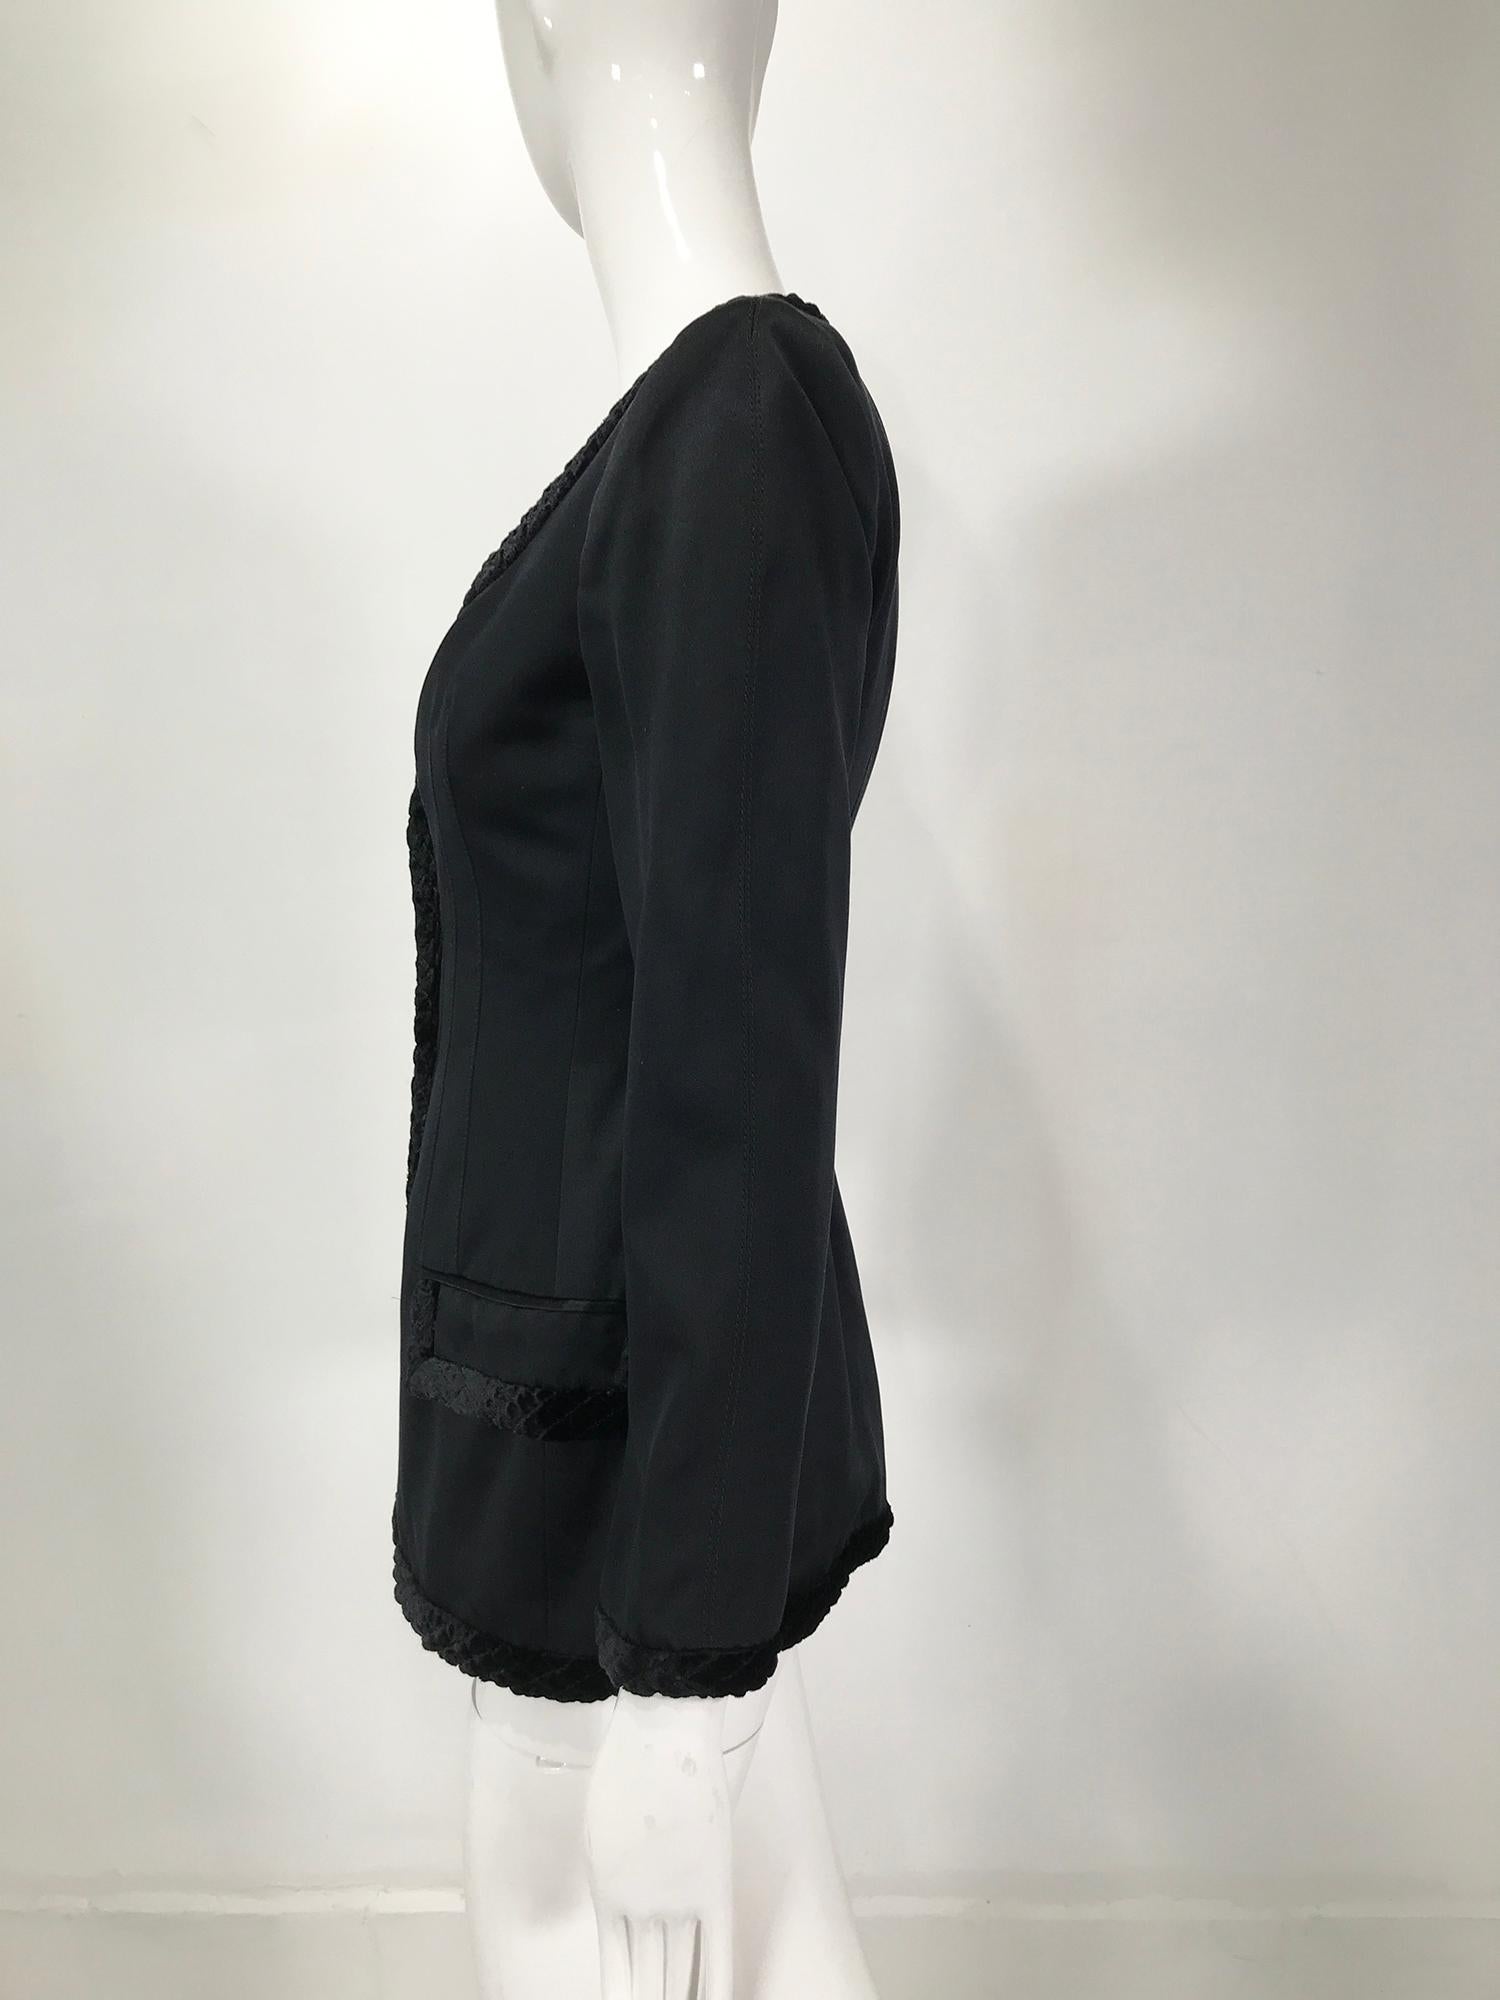 Valentino Black Silk Fitted Jewel Button Evening Jacket 1990s In Good Condition For Sale In West Palm Beach, FL